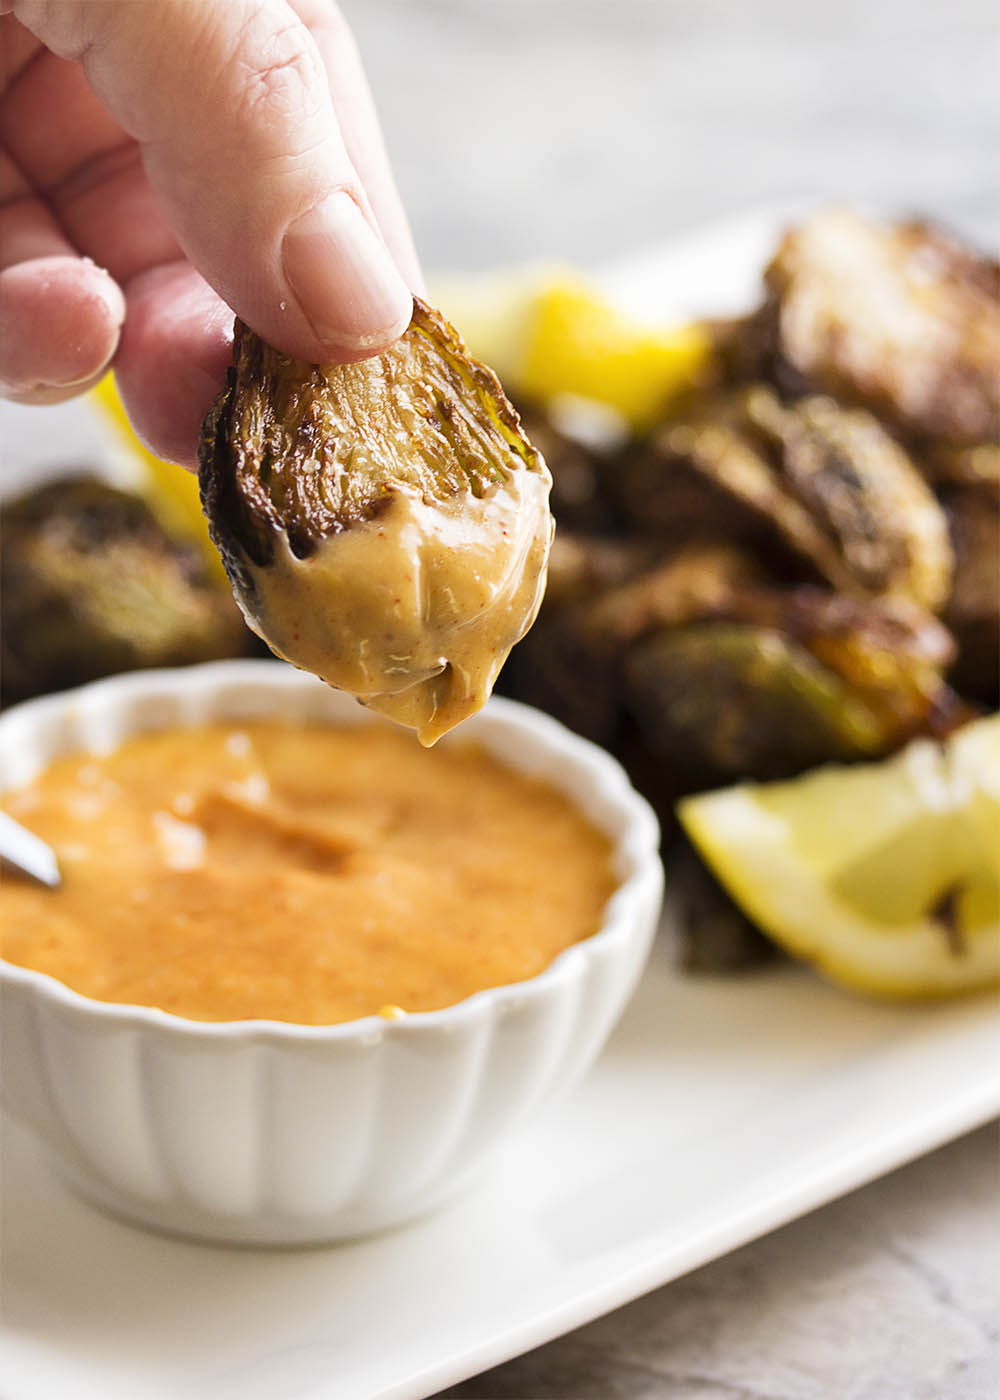 A hand holding up a crispy deep fried Brussels sprout which has been dipped in the sweet and spicy maple aioli.